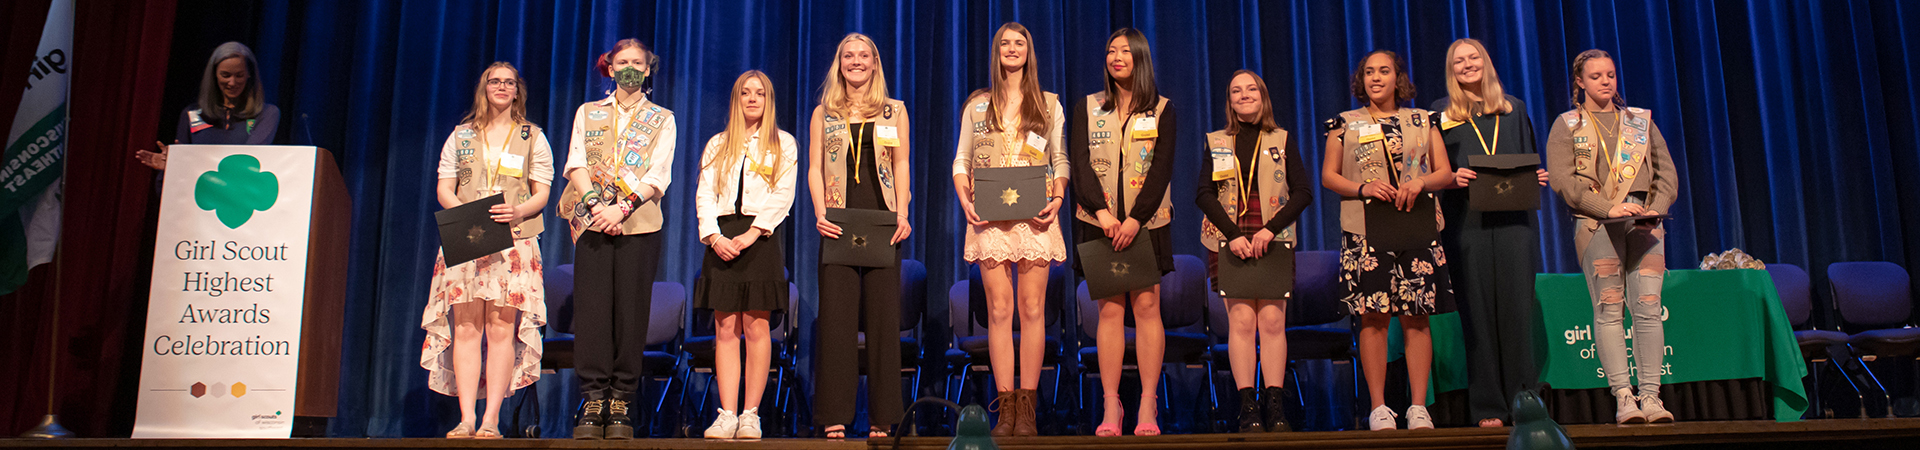  Ten Gold Award Girl Scouts on stage at Highest Awards celebration 